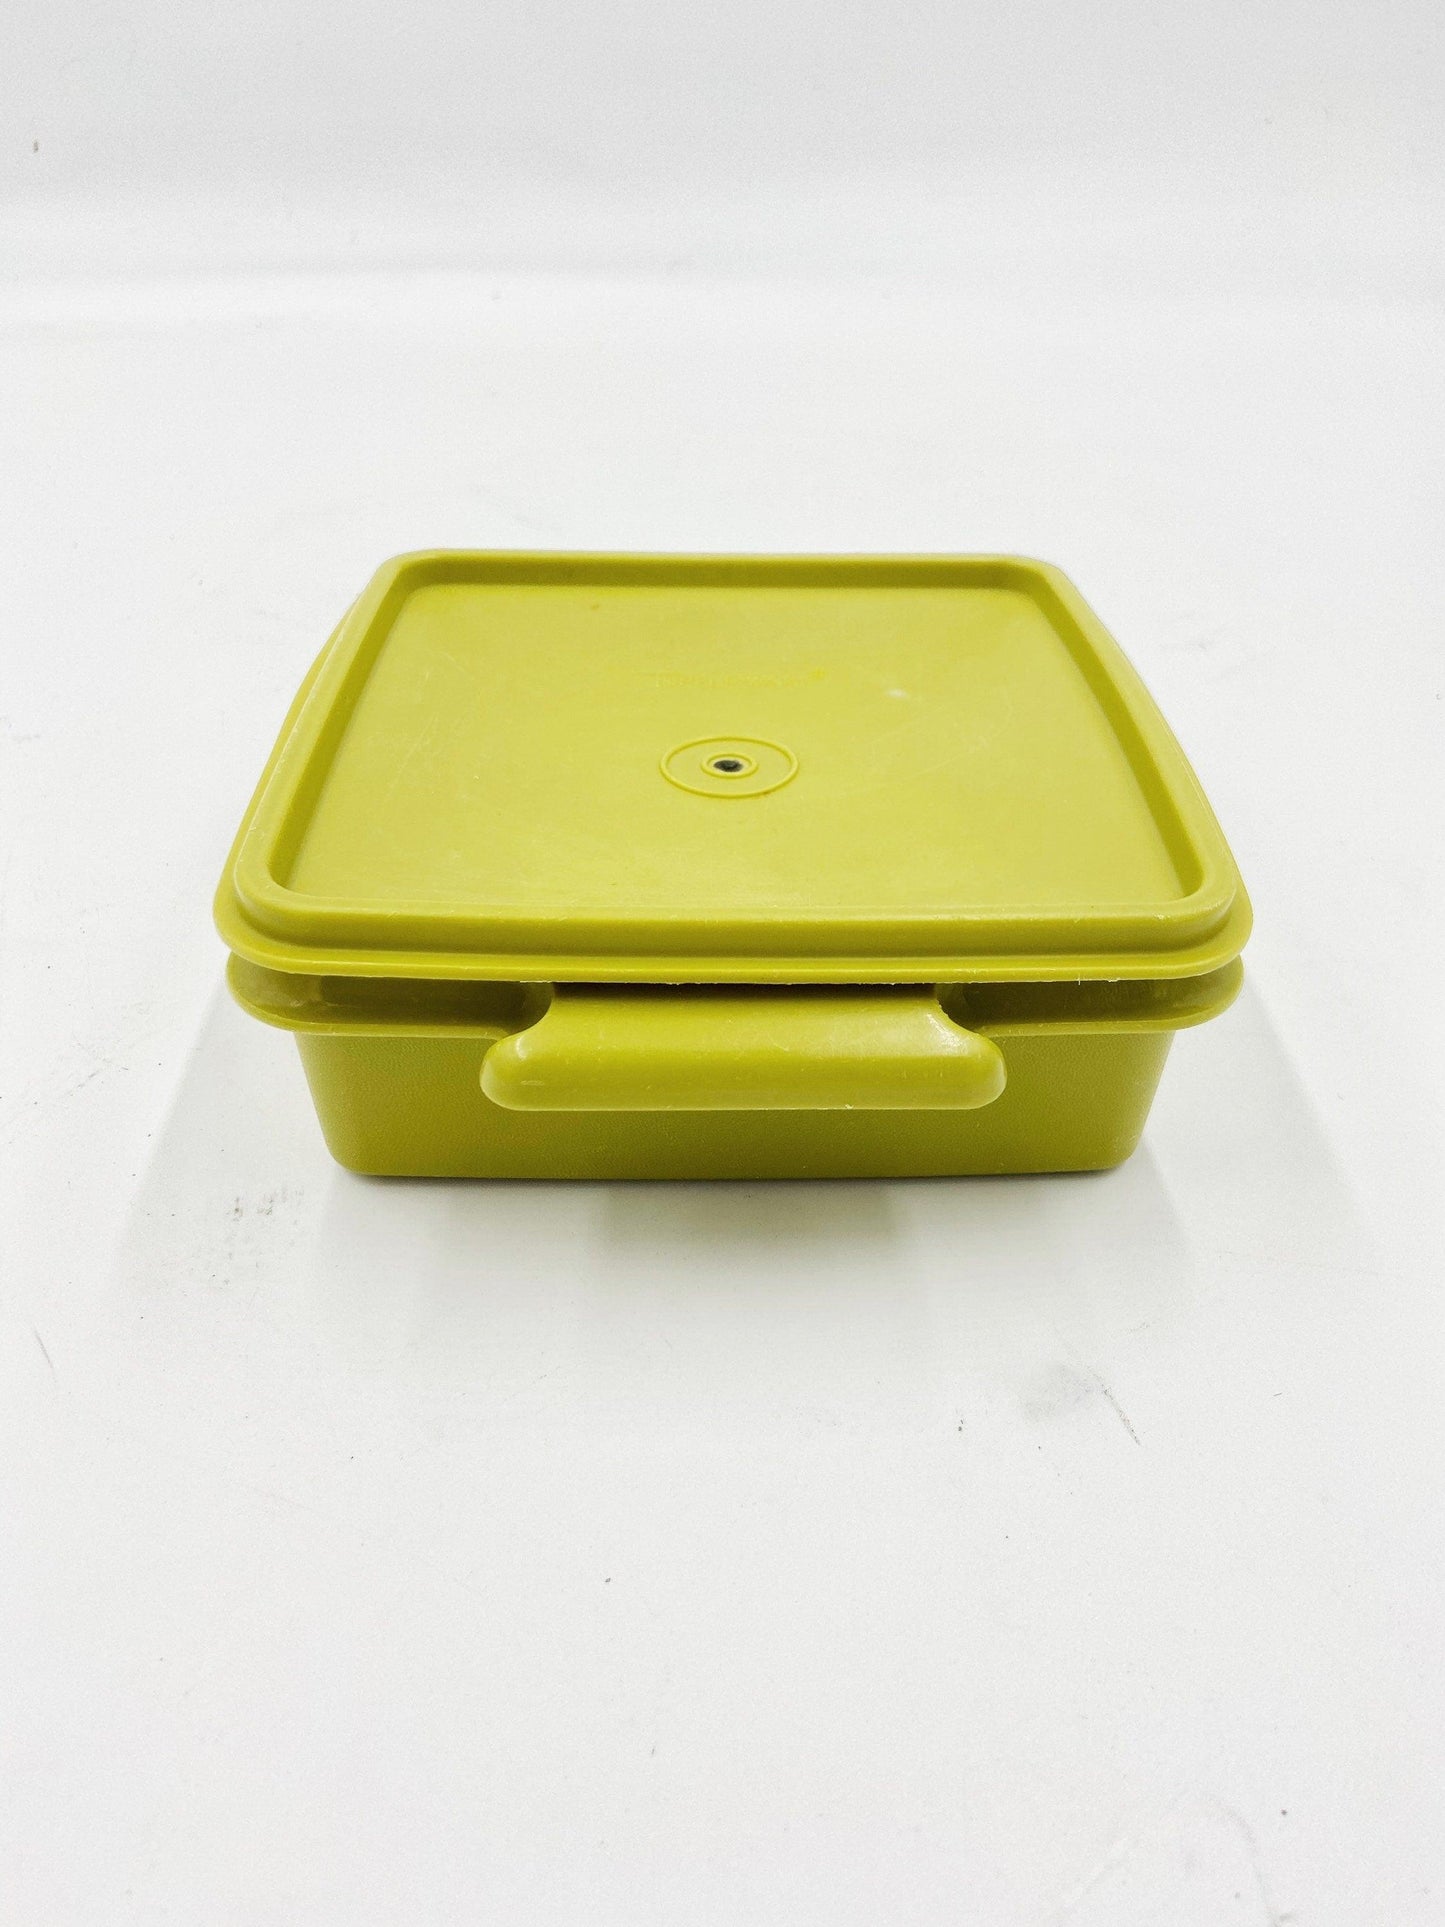 https://funkyhousevintage.com/cdn/shop/files/vintage-green-tupperware-square-stacking-bowl-antique-tupper-ware-food-storage-retro-kitchen-mid-century-modern-kitchen-decor-1970s-located-at-funkyhouse-vintage-antique-store-weiser_1b1eabb5-015a-4fb0-8860-6042062c30a5.jpg?v=1688592964&width=1445